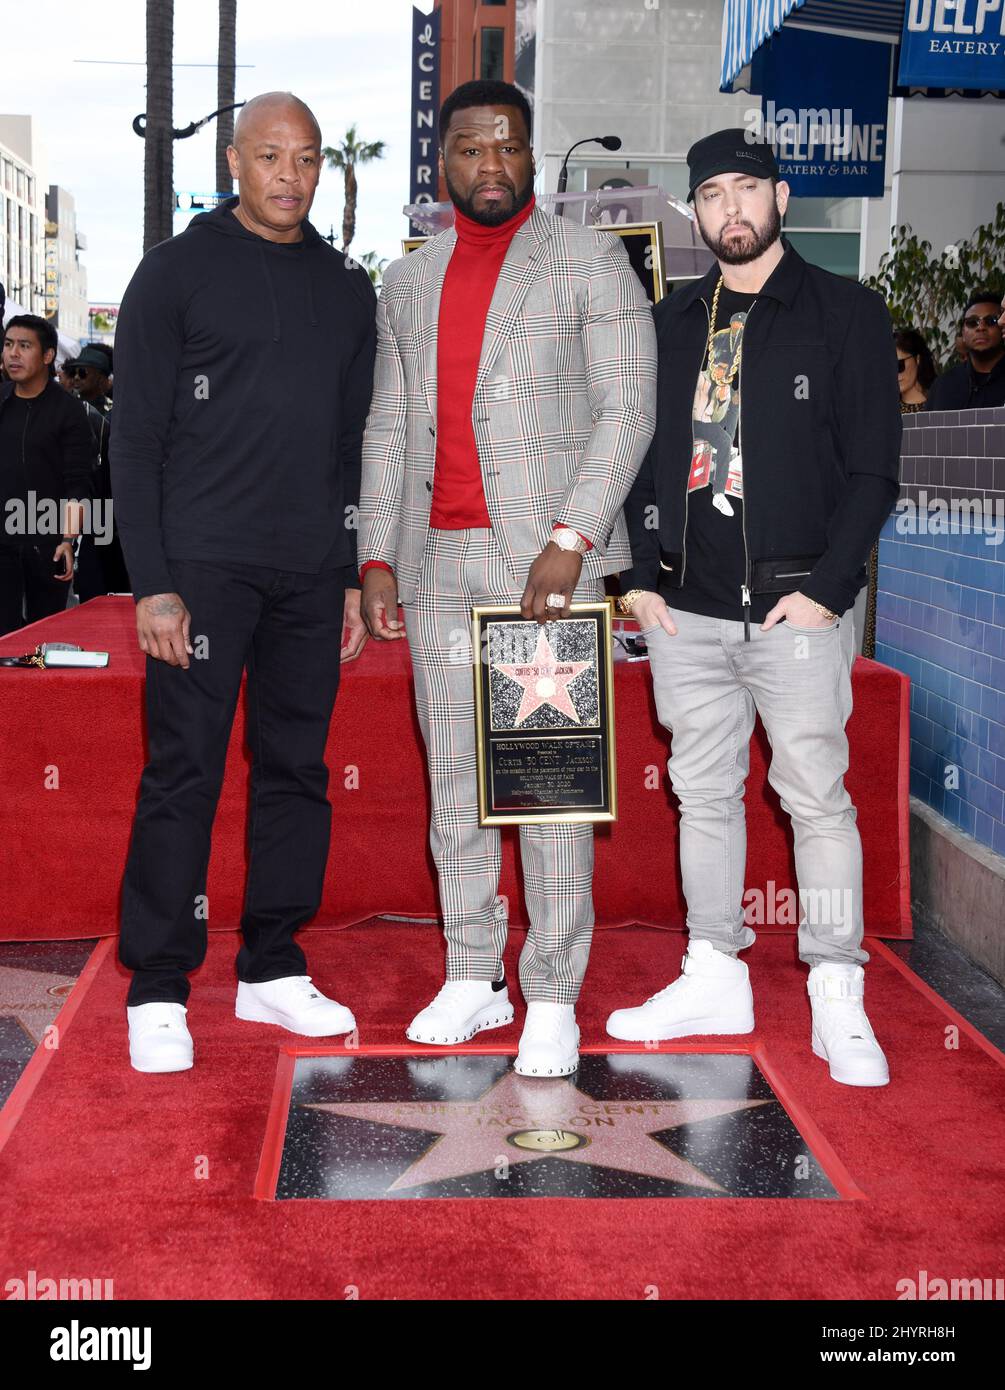 Dr Dre is in ICU after suffering a brain aneurysm on Monday in Los Angeles, Ca. Curtis '50 Cent' Jackson, Dr Dre and Eminem is joined by Dr Dre and Eminem at his Hollywood Walk of Fame star ceremony on January 30, 2020 in Hollywood, CA. Stock Photo